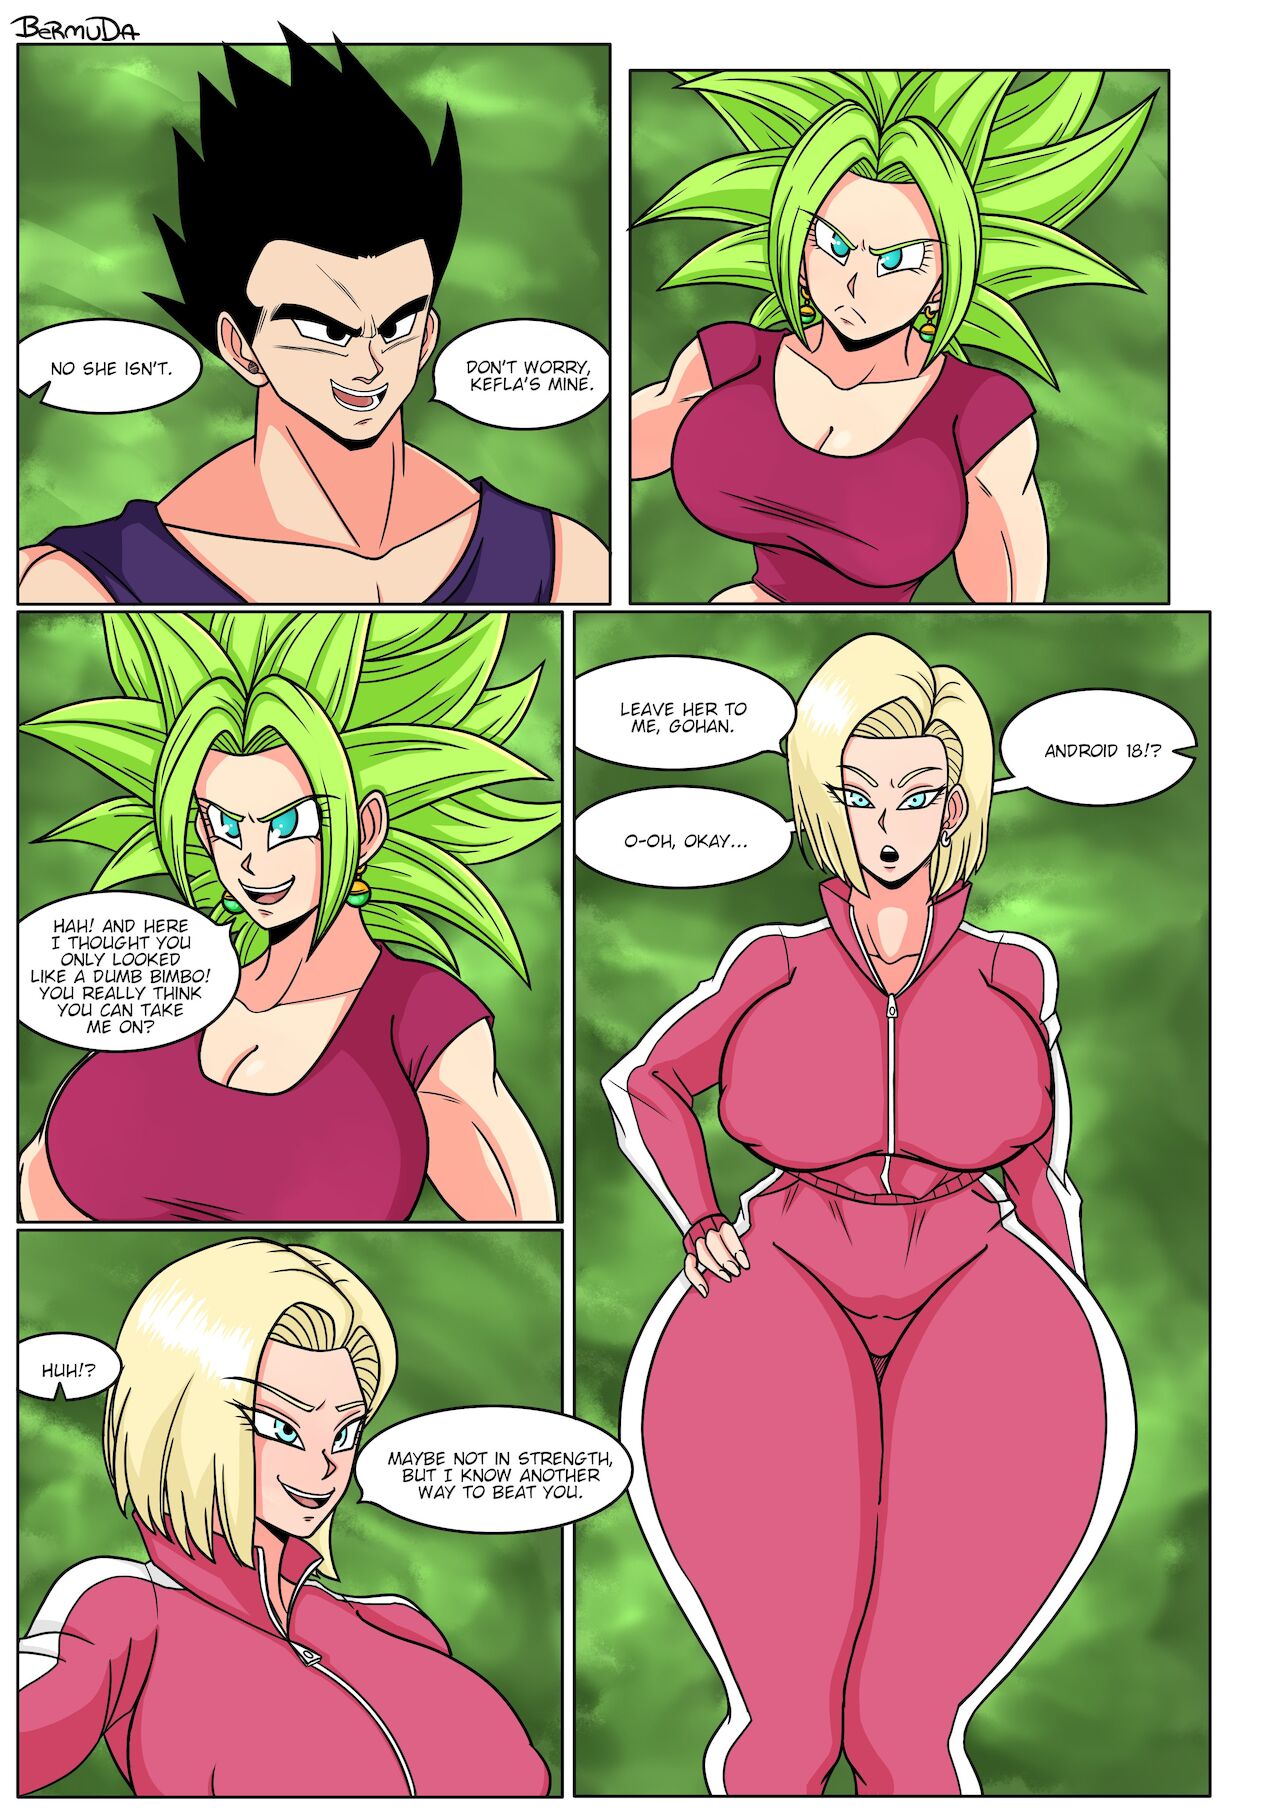 1280px x 1810px - Android 18 Has A Plan - Bermuda - KingComiX.com